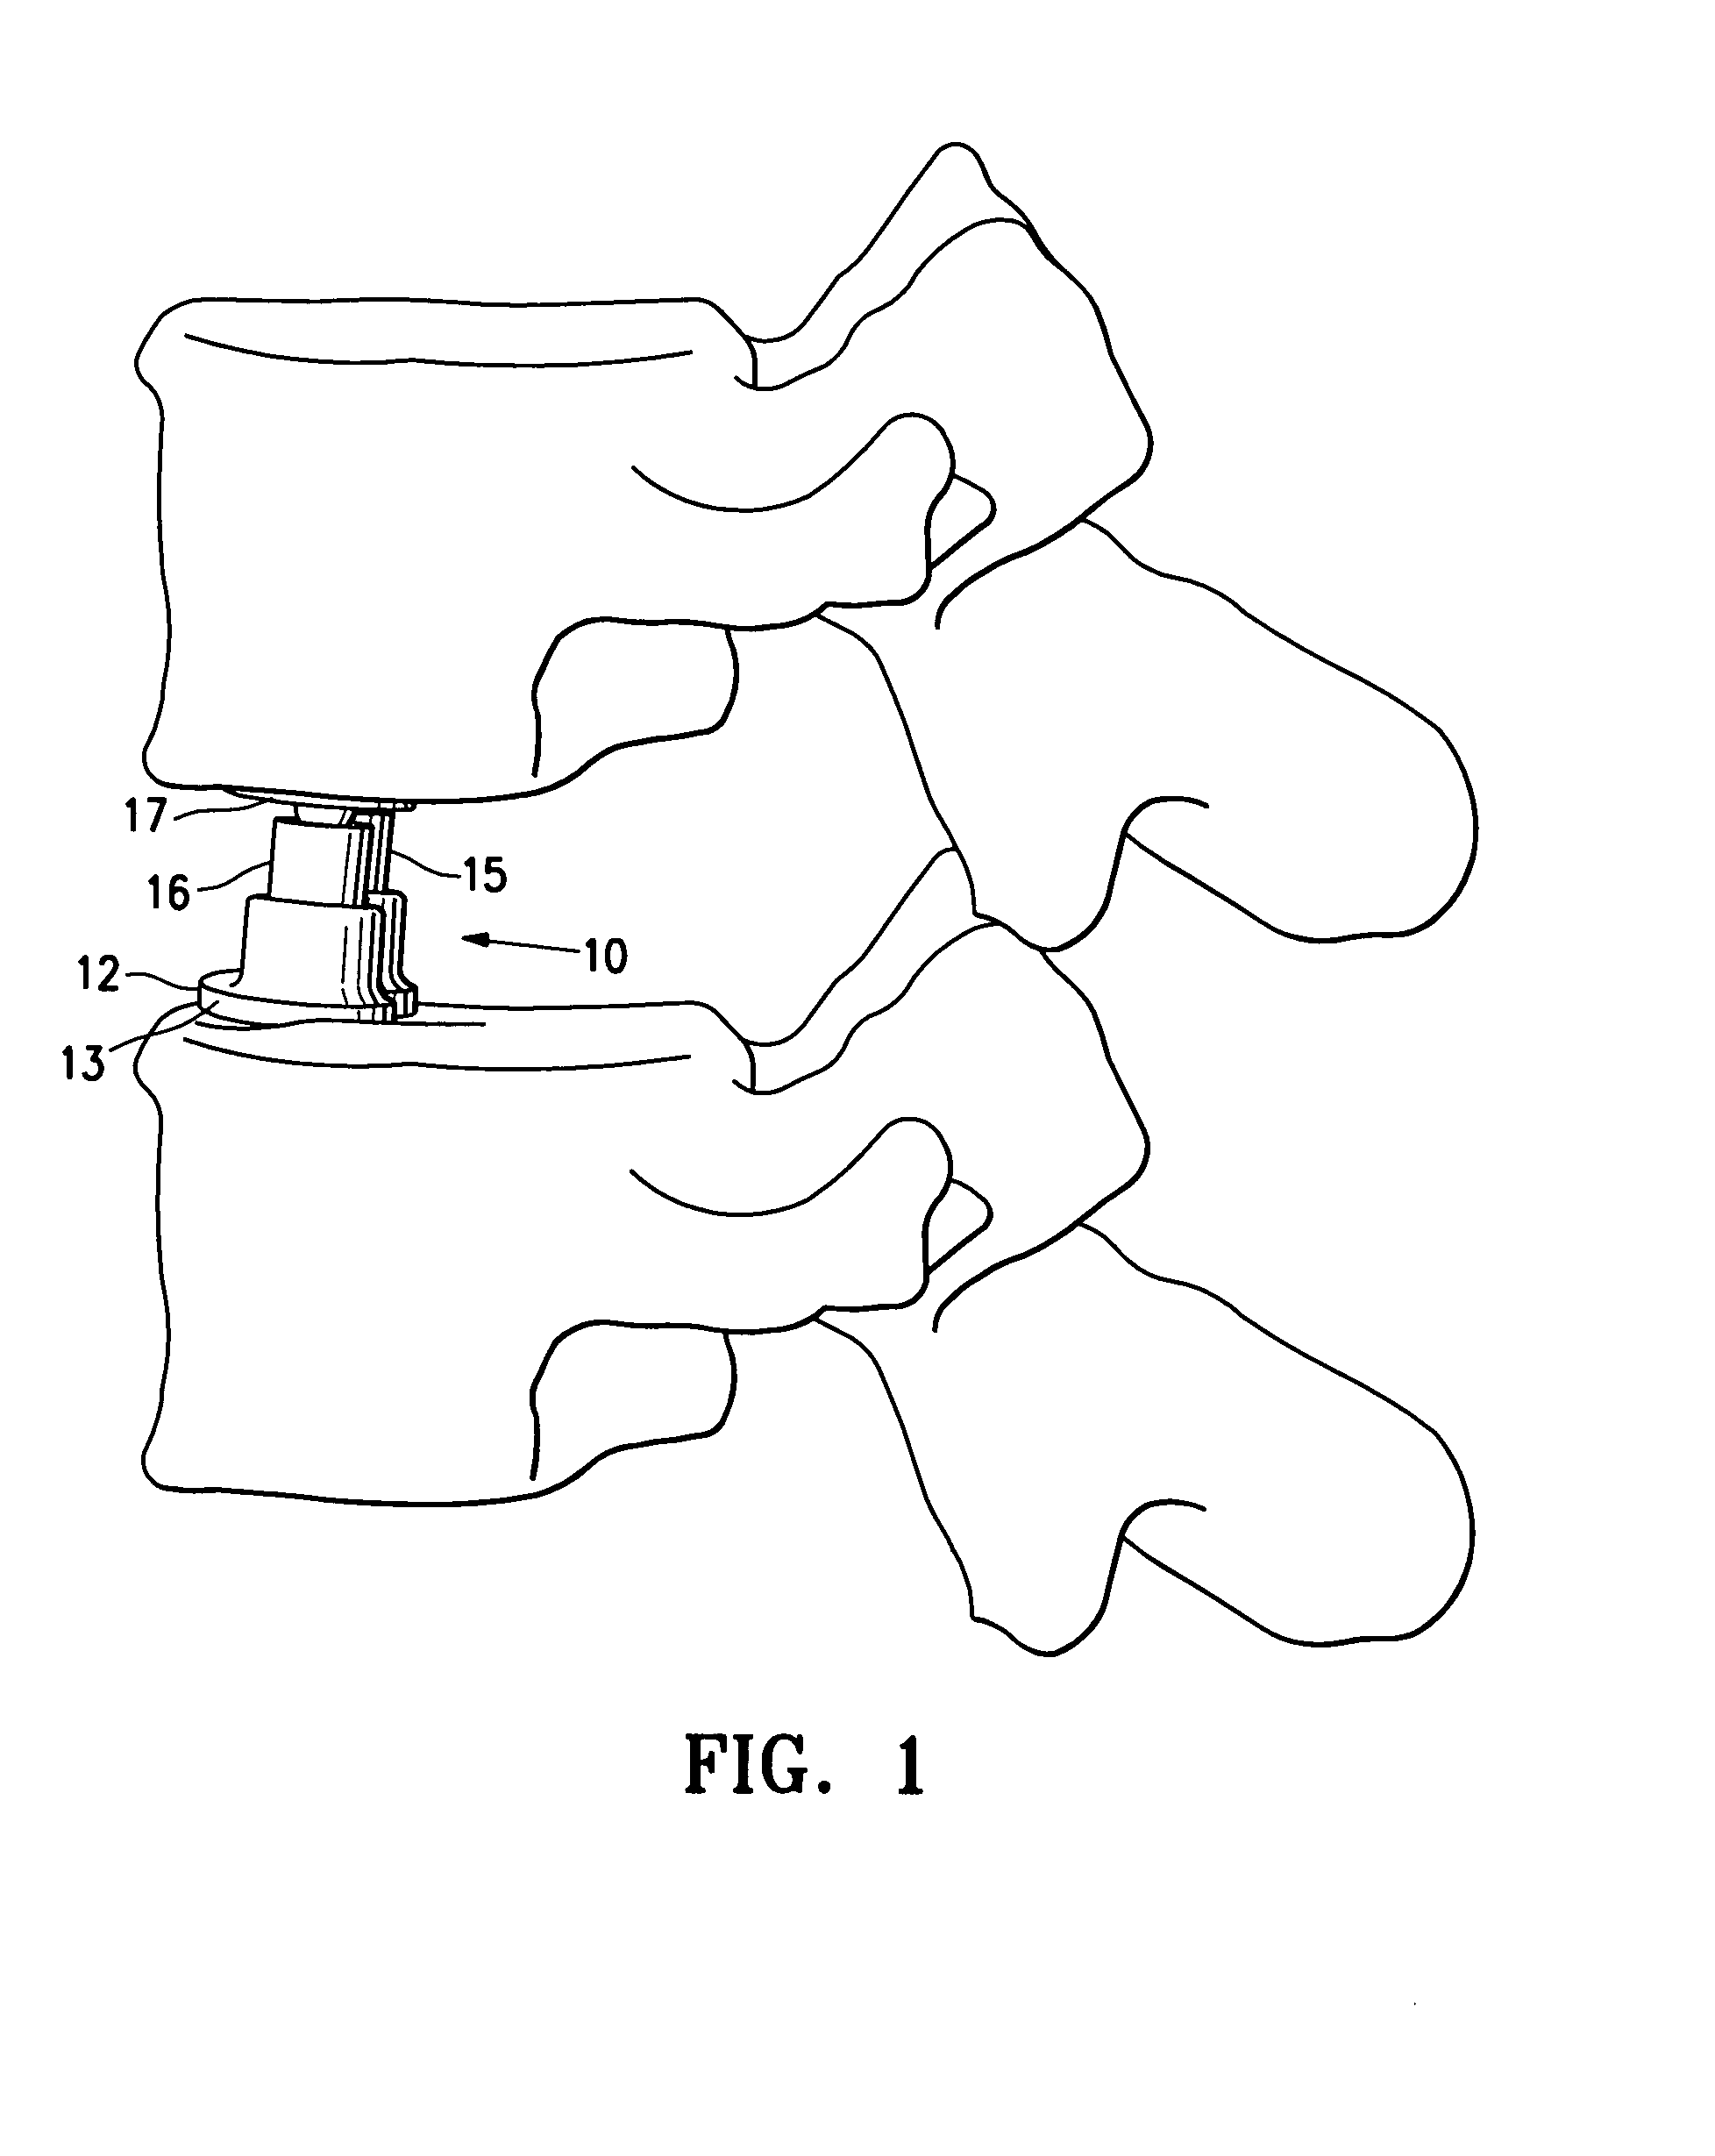 Spinal implant with expandable fixation